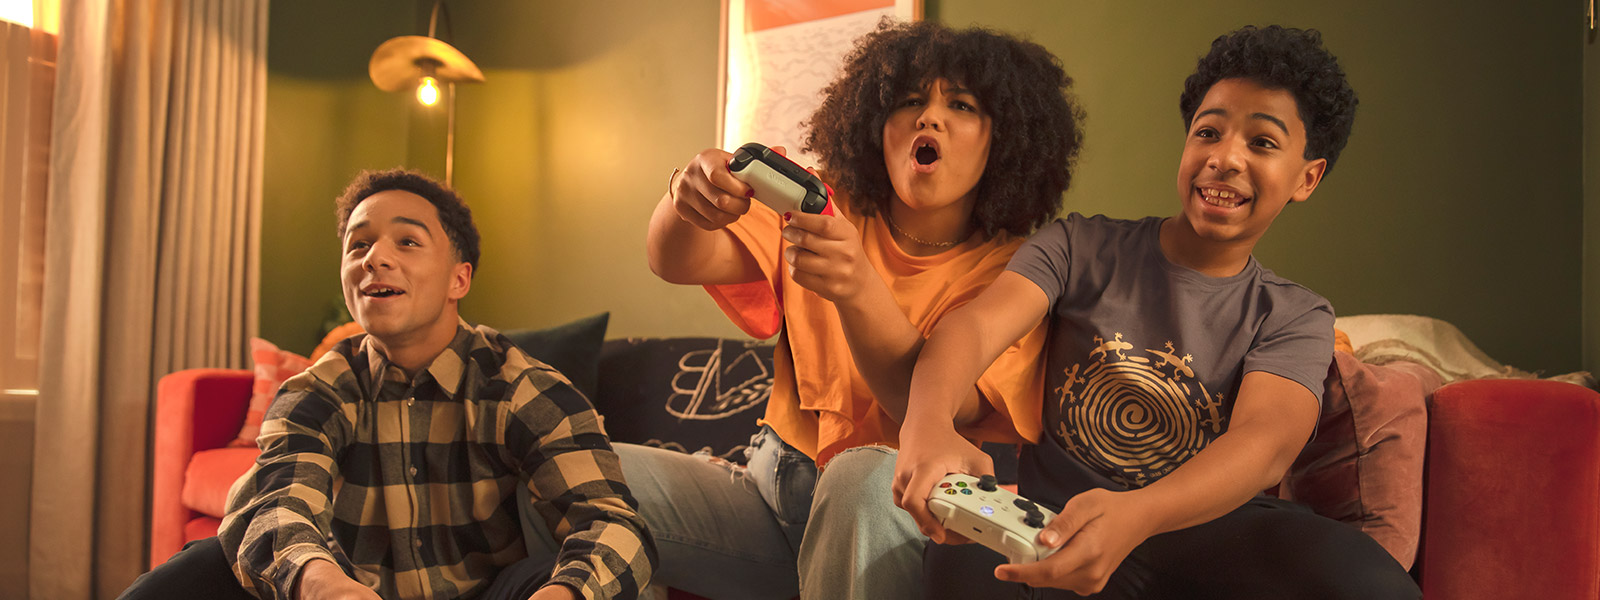 Three kids sitting on a sofa gaming on an Xbox system.